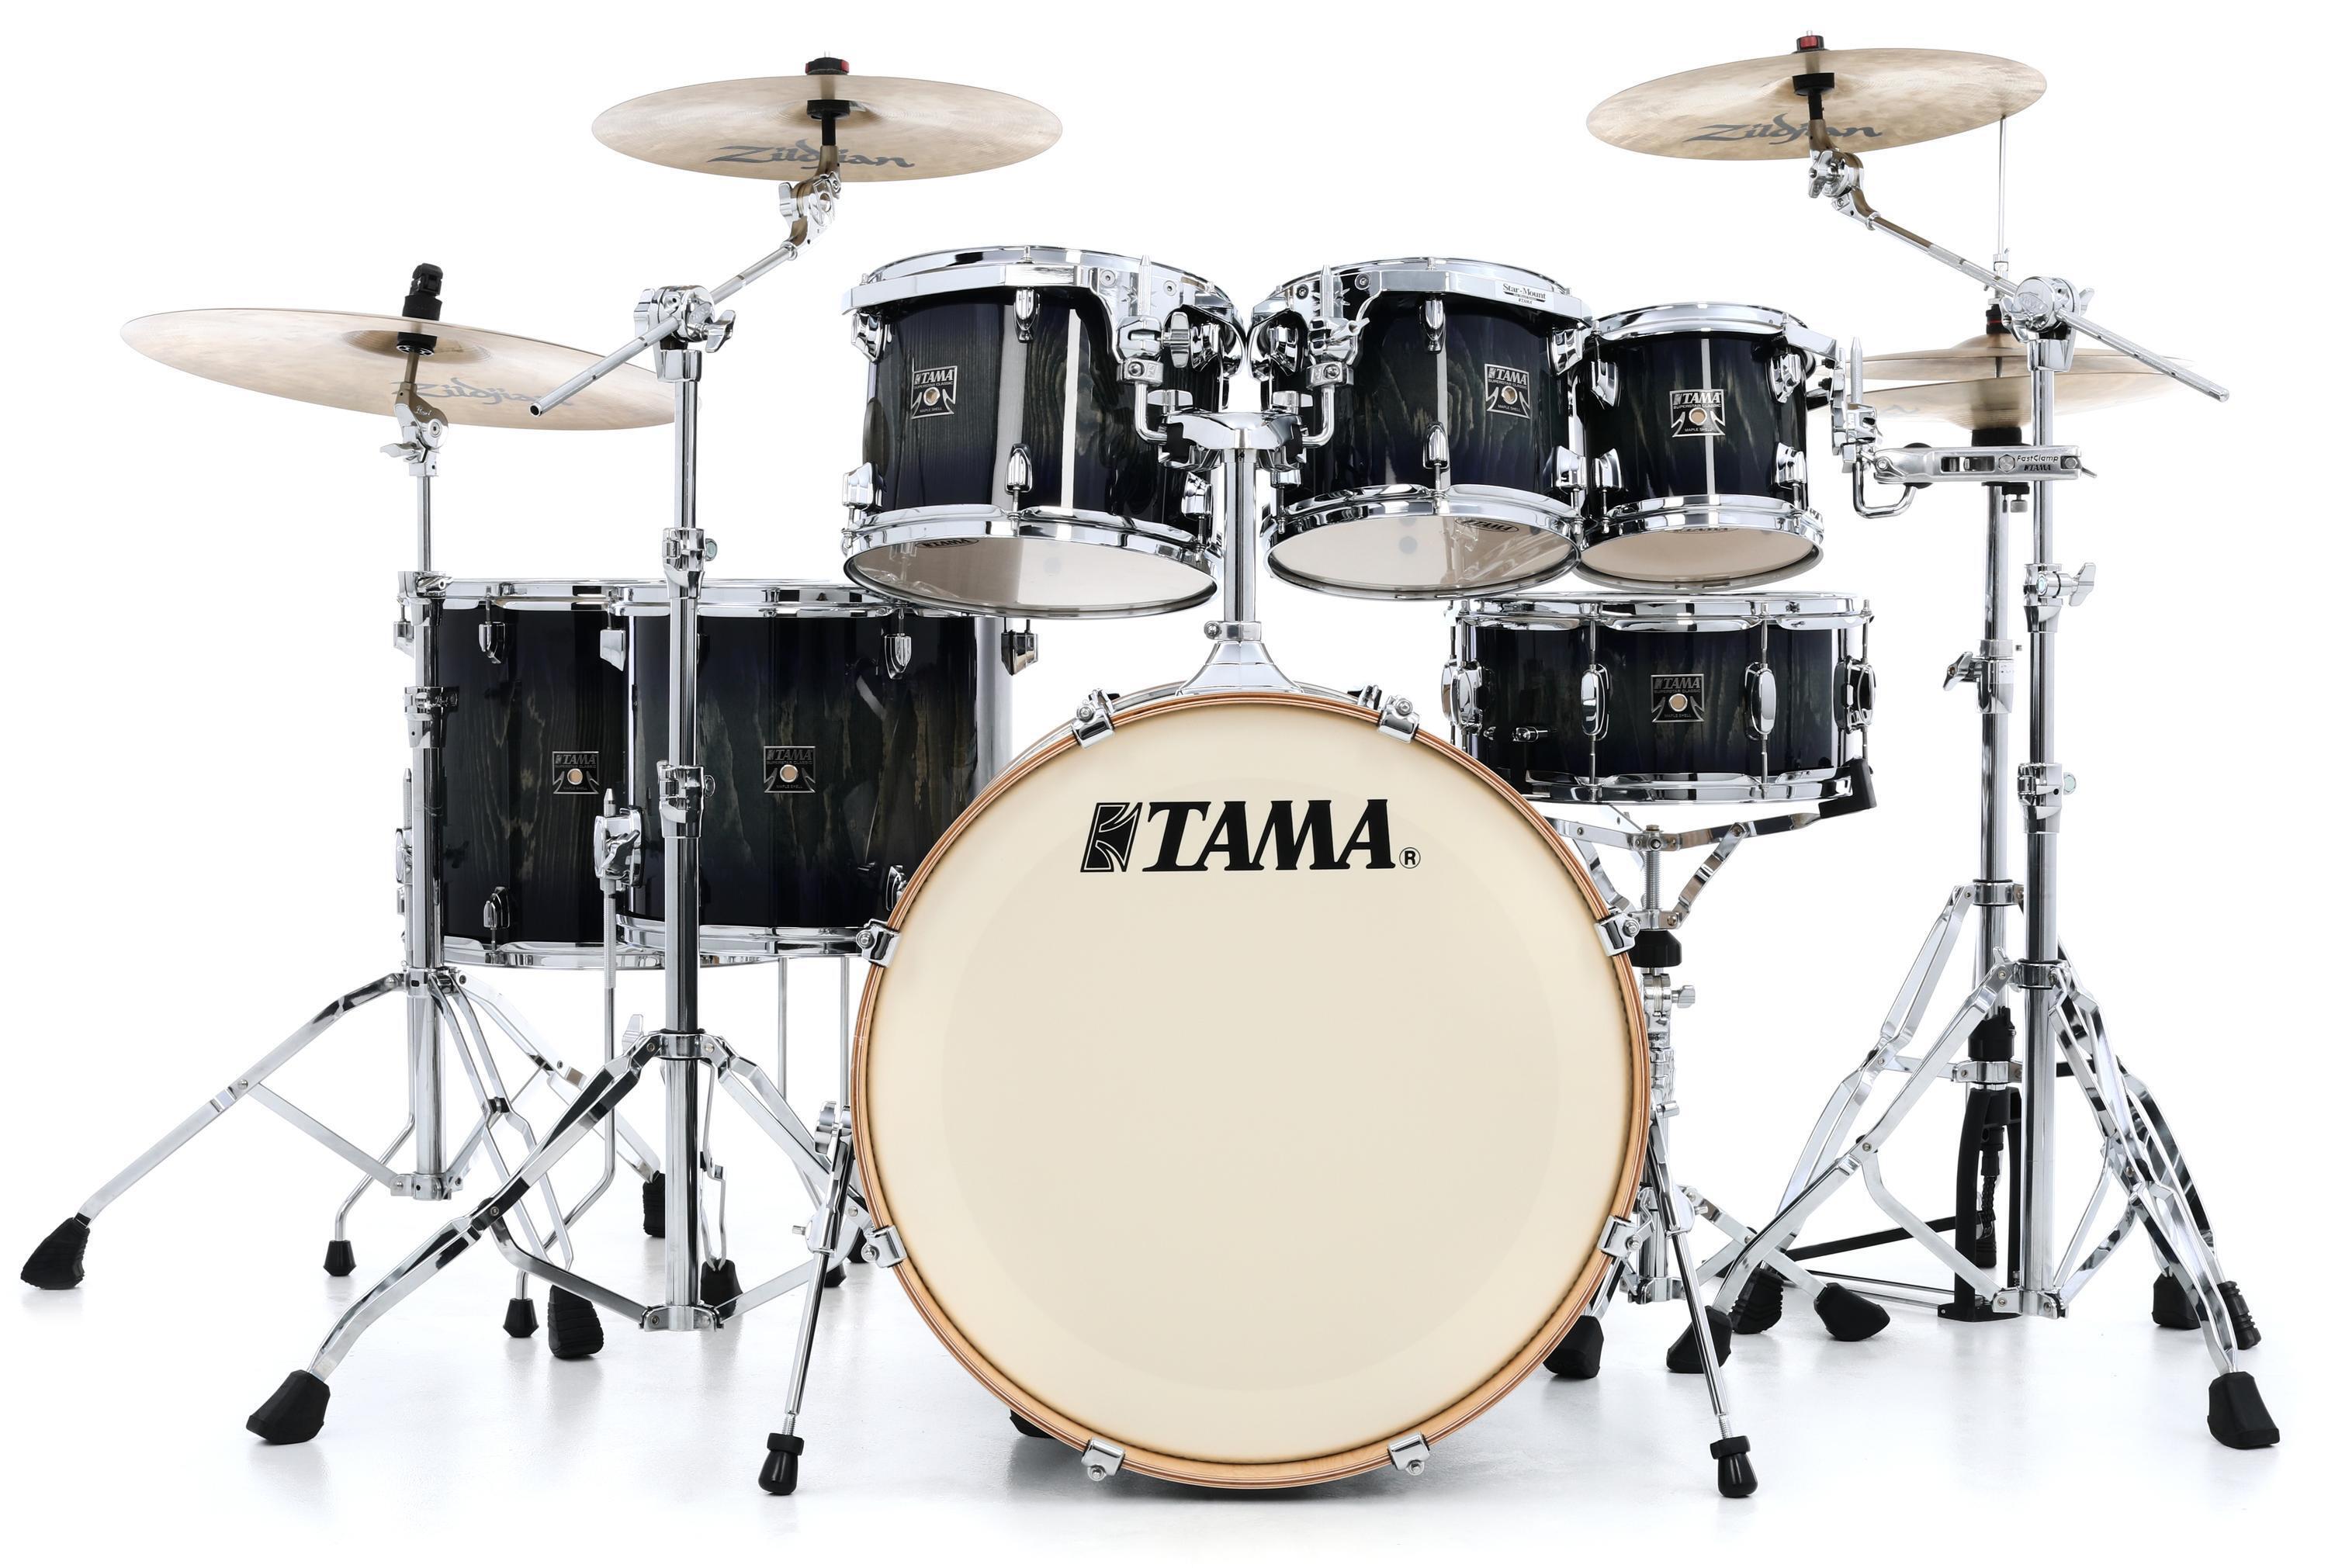 Tama Superstar Classic CL72S 7-piece Shell Pack with Snare Drum - Dark  Indigo Lacebark Pine - Sweetwater Exclusive